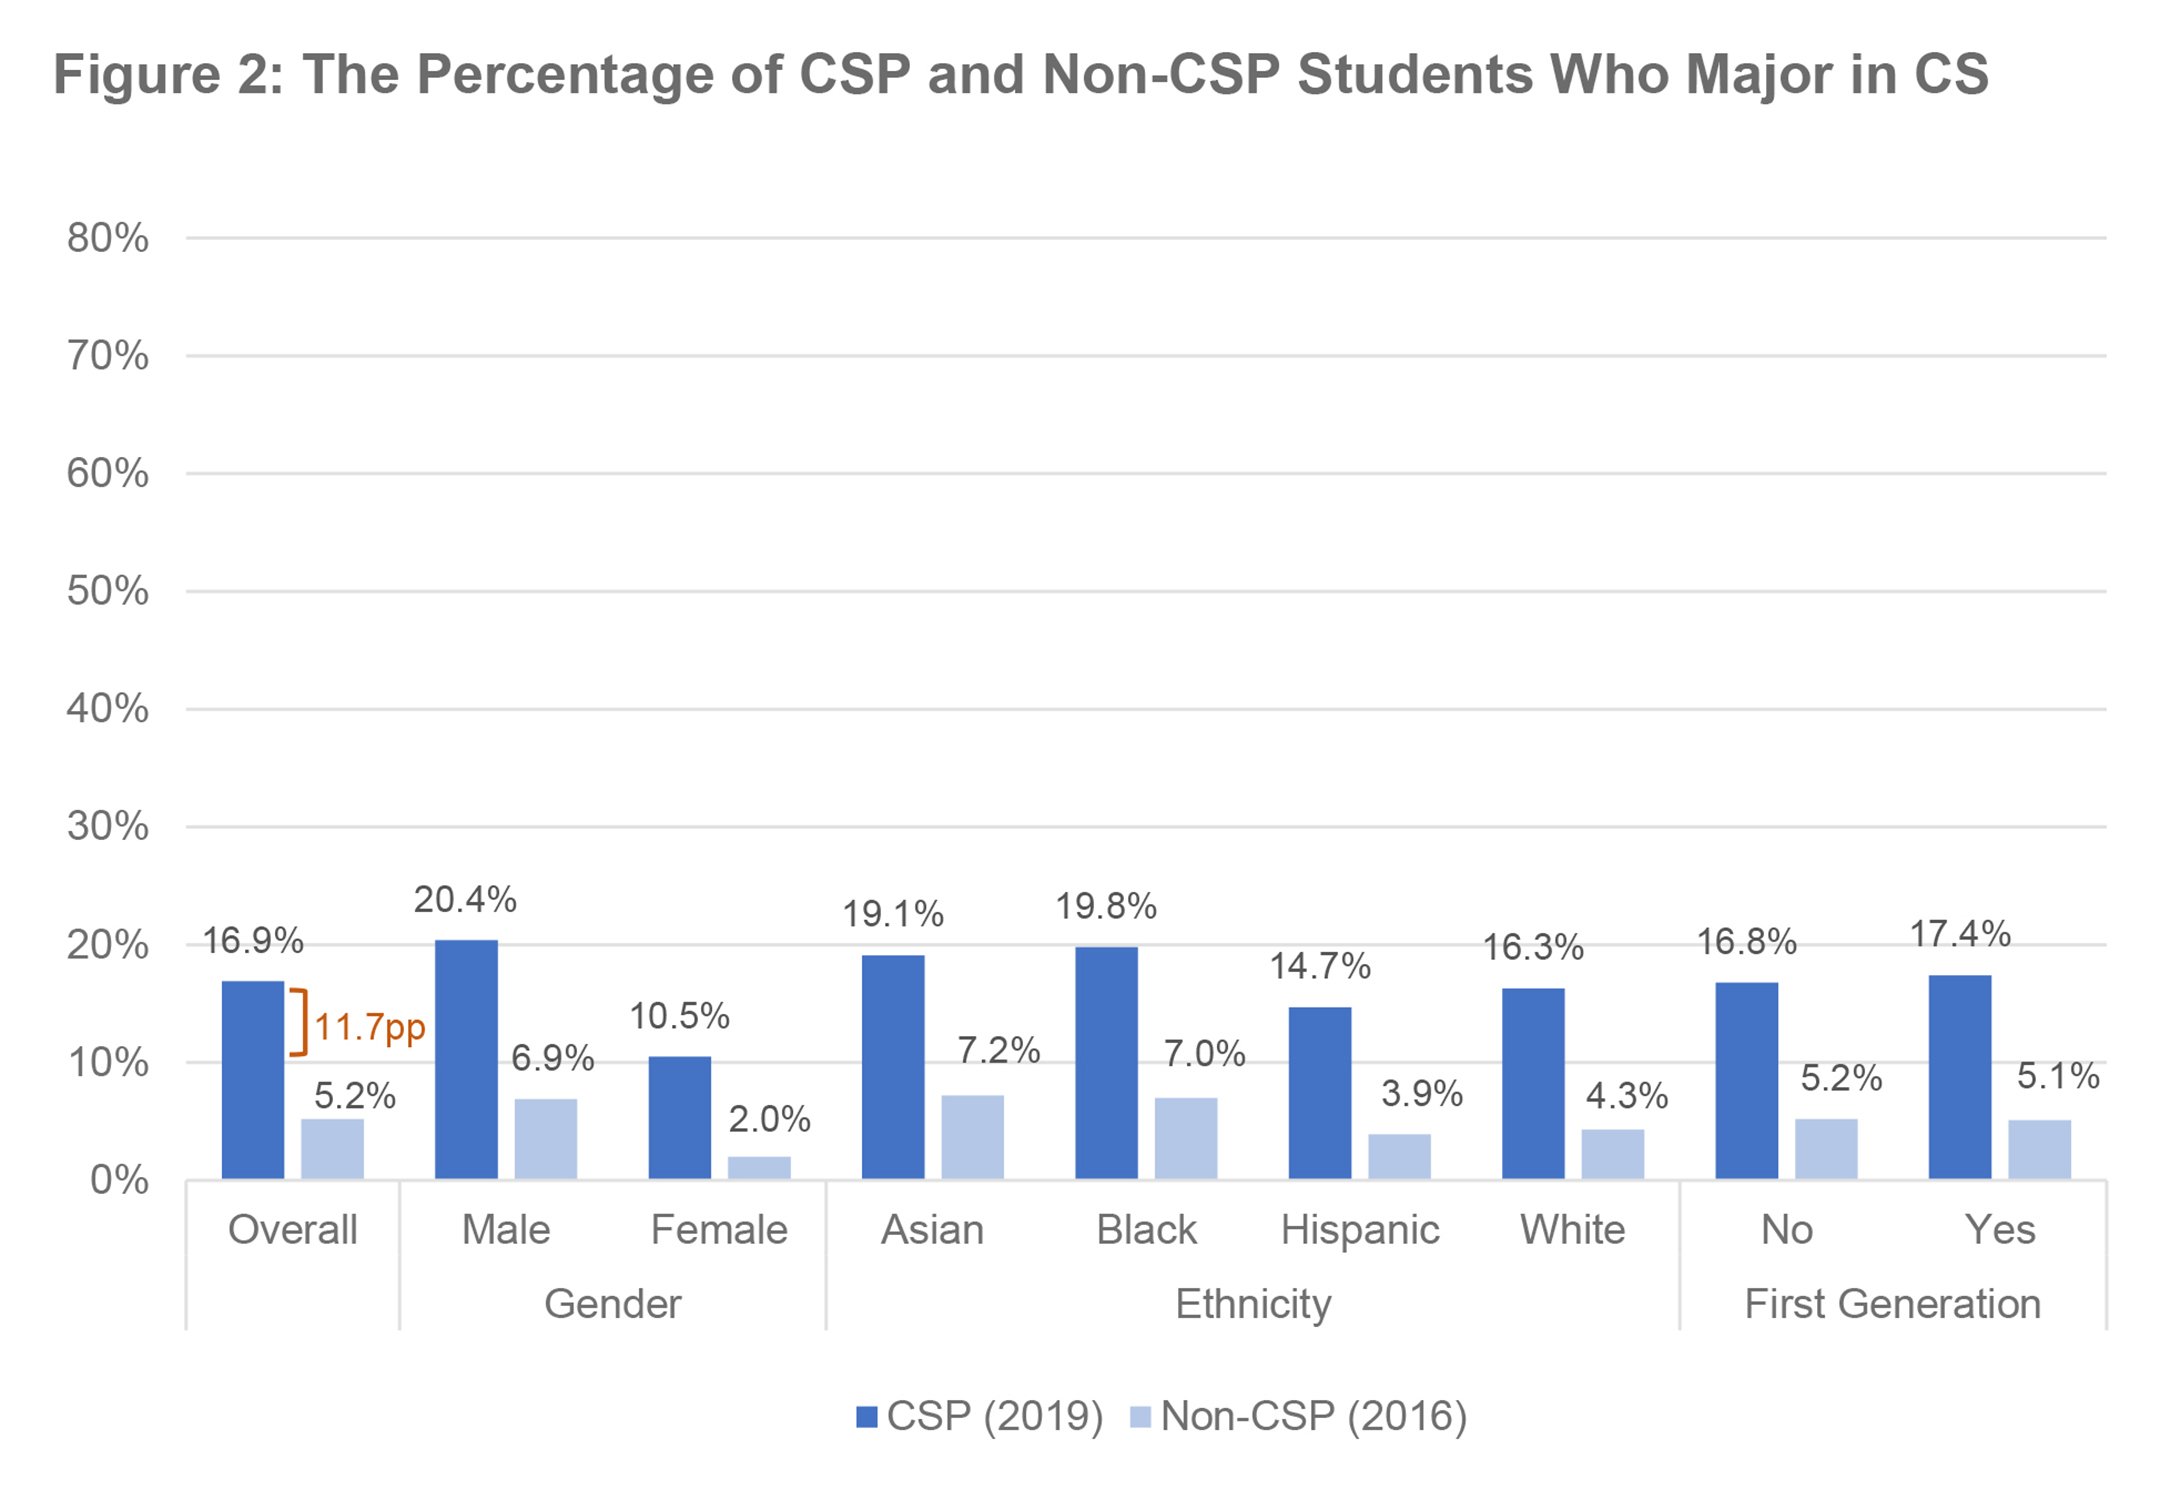 Bar chart titled "Figure 2: The Percentage of CSP and Non-CSP Students Who Major in CS" graphing results (from left) for Overall, Male, Female, Asian, Black, Hispanic, White, and First Generation students